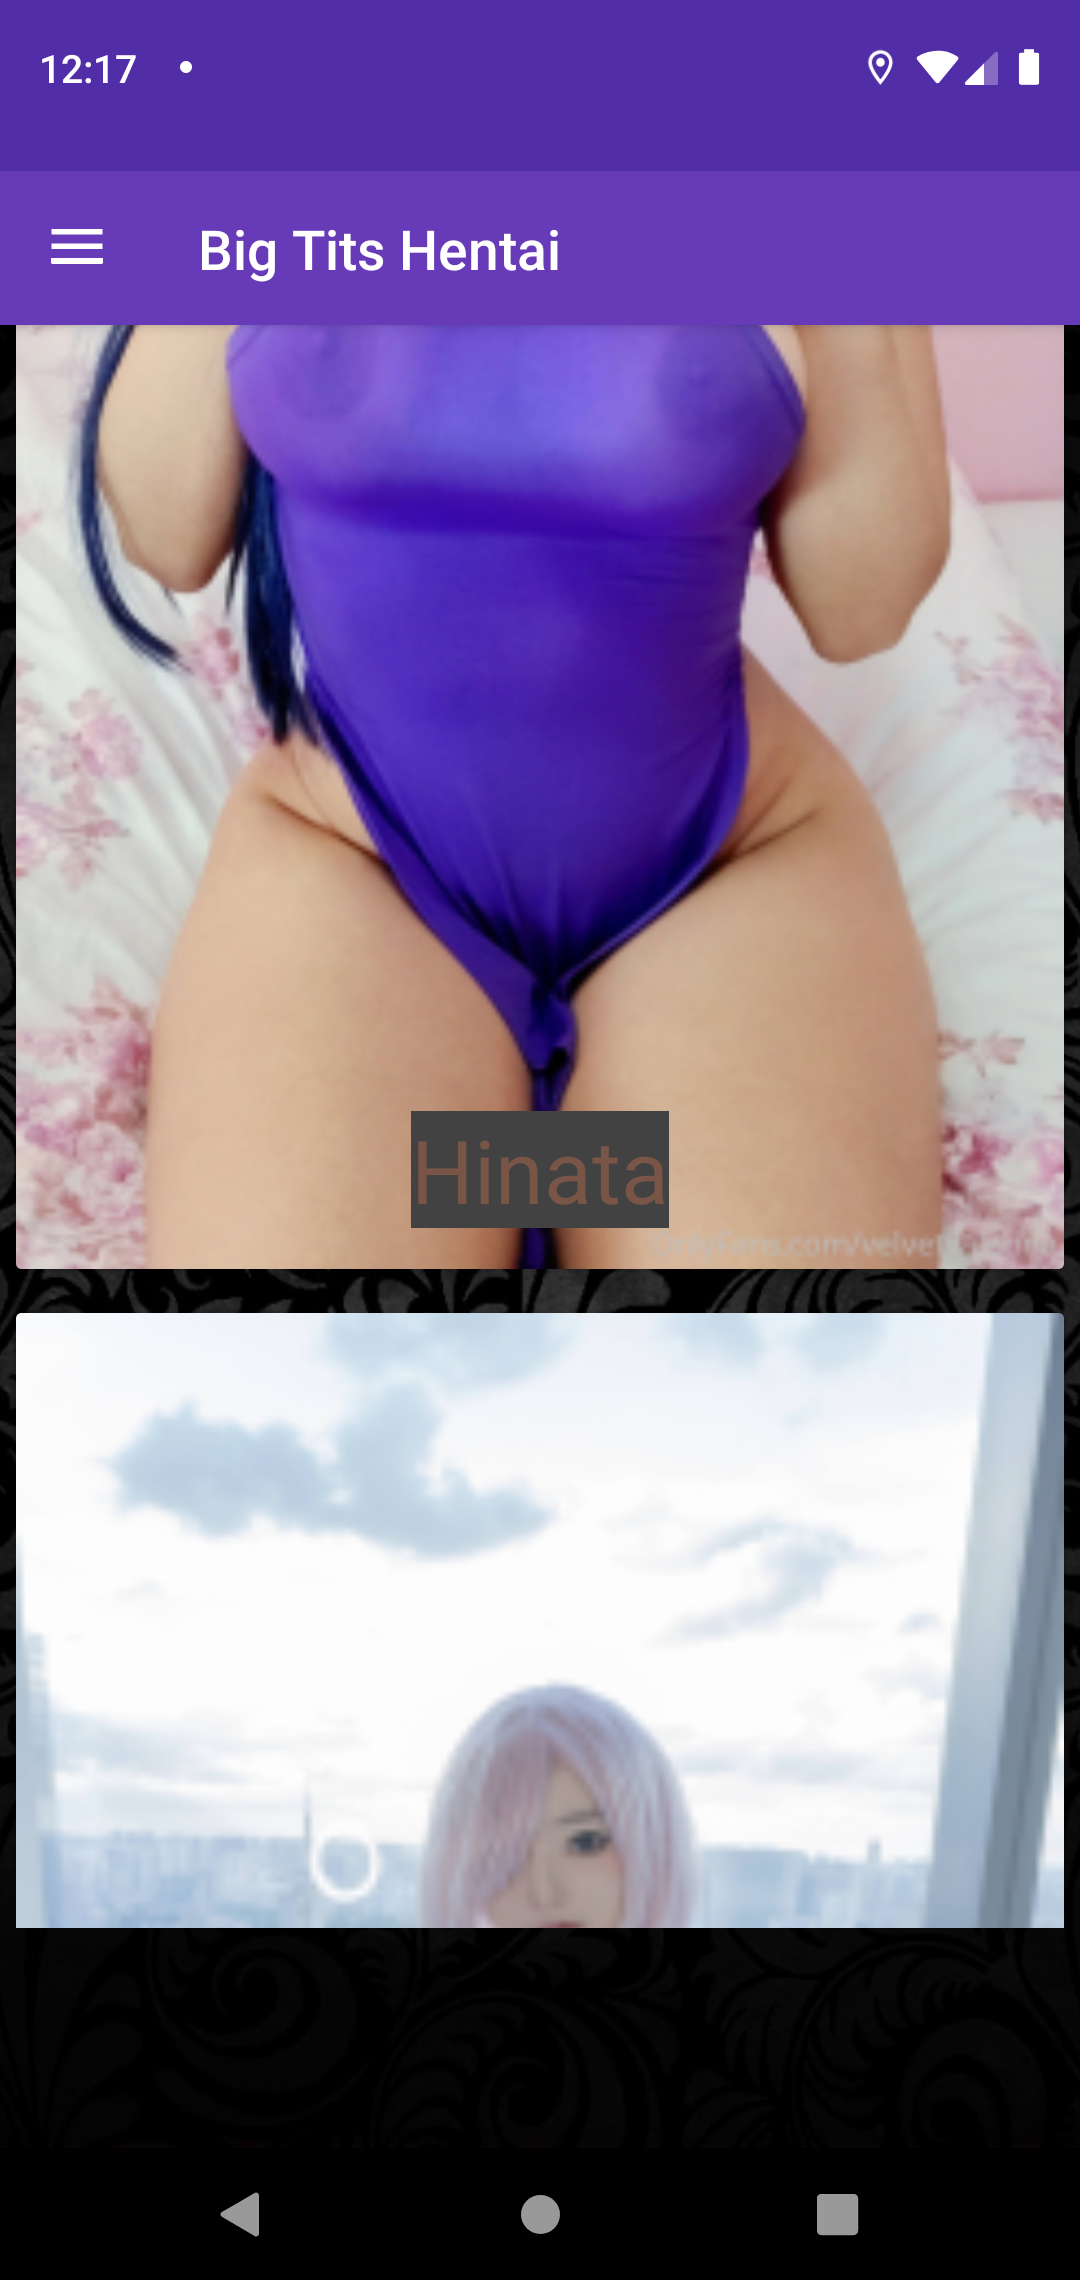 Big Tits Hentai porn,asian,pics,android,for,pic,hot,hentai,picture,girls,comics,excuses,sexy,apk,pictures,watching,adult,tits,wallpaper,free,photo,app,best